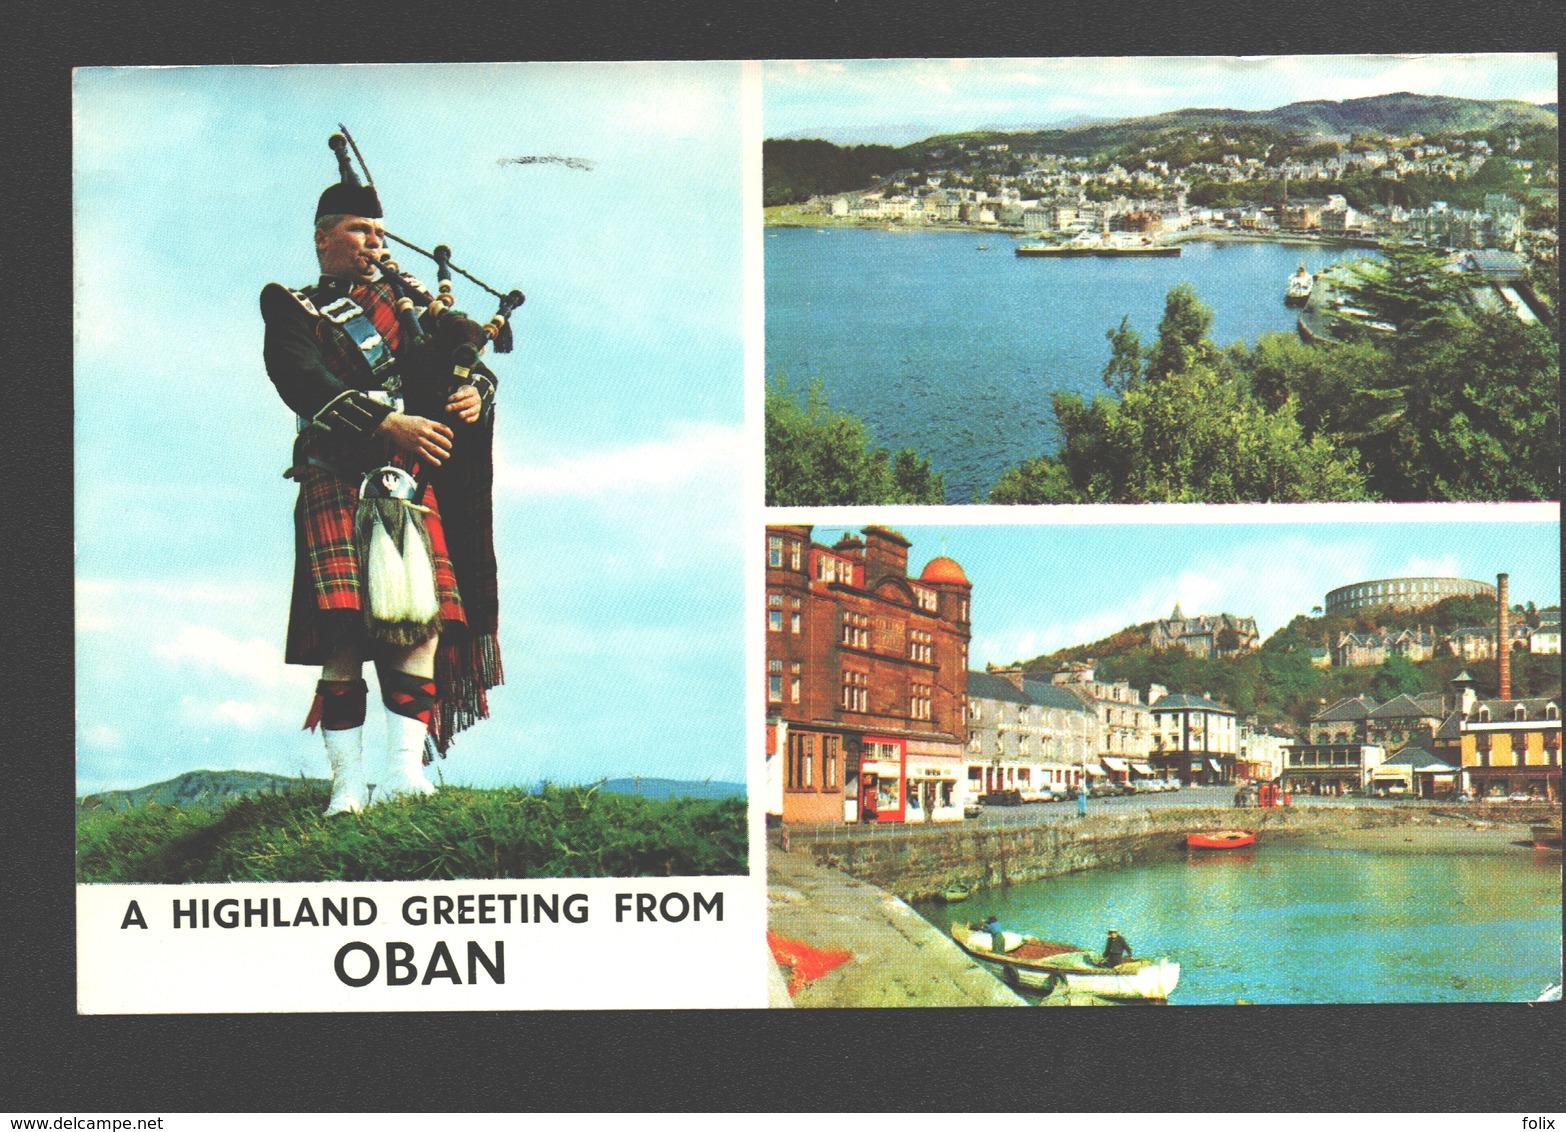 Oban - A Highland Greeting From Oban - From Pulpit Hill - The Harbour - Multiview - 1969 - Argyllshire